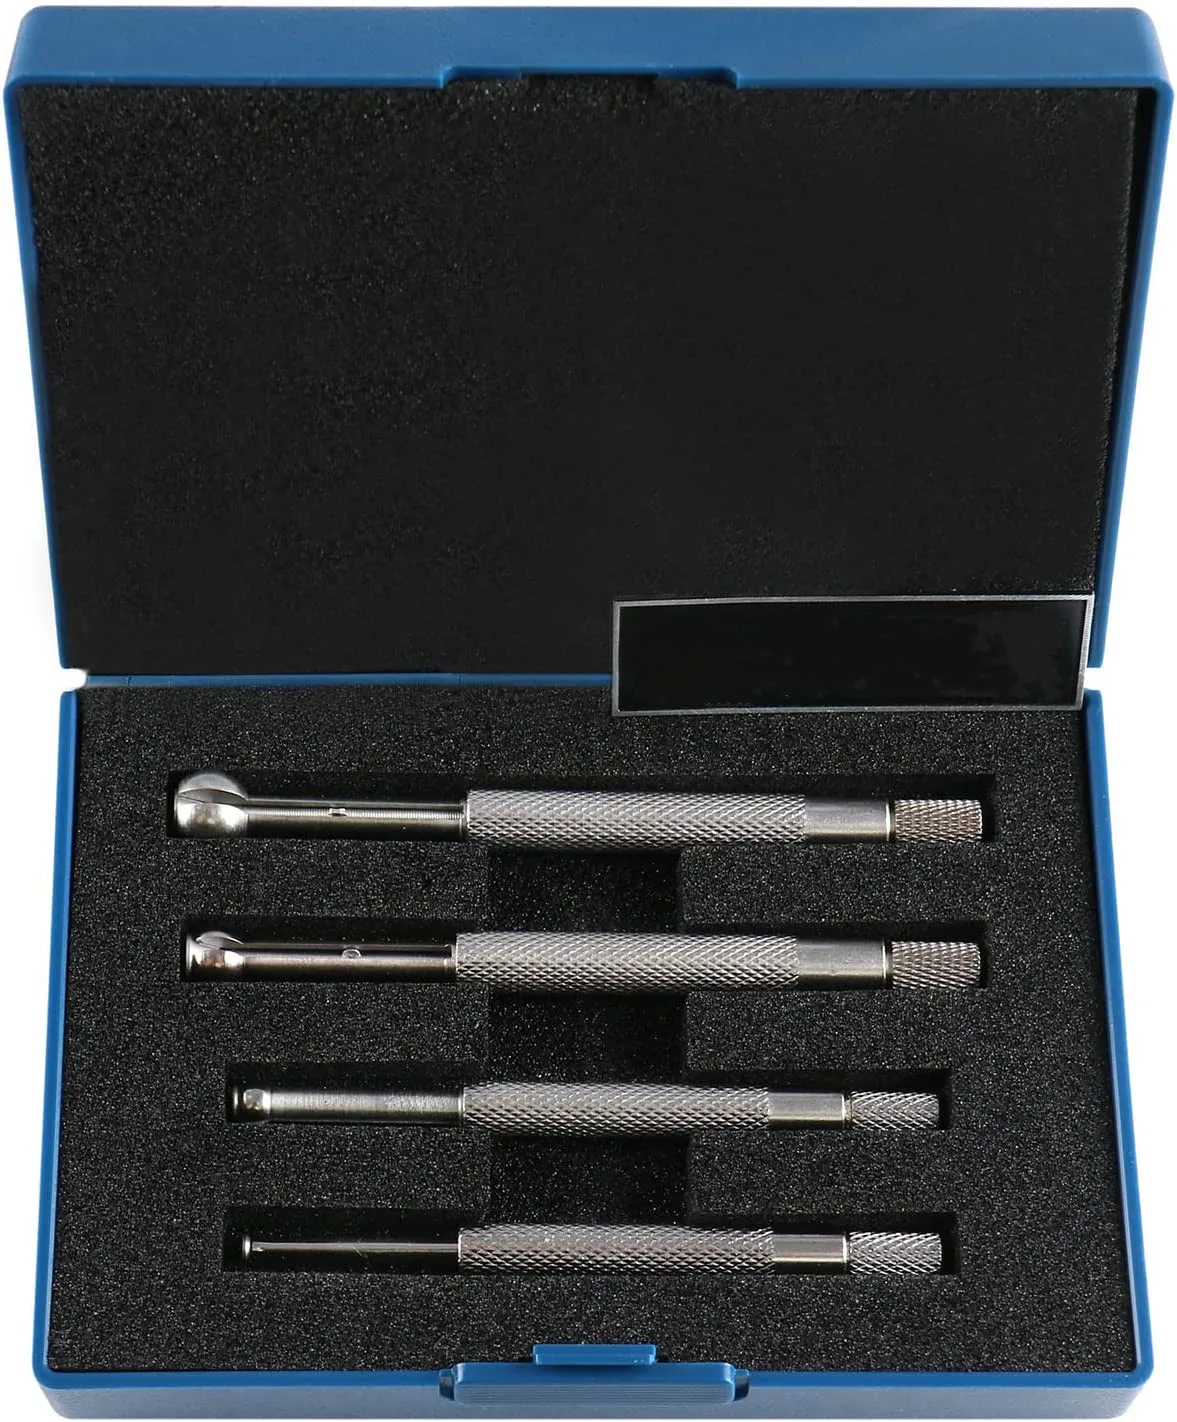 Industrial Tools 4 Pc Small Hole Gauge Set, Ball Type, inch/mm, 1/8 to 1/5, 1/5 to 3/10, 3/10 to 2/5, 2/5 to 1/2